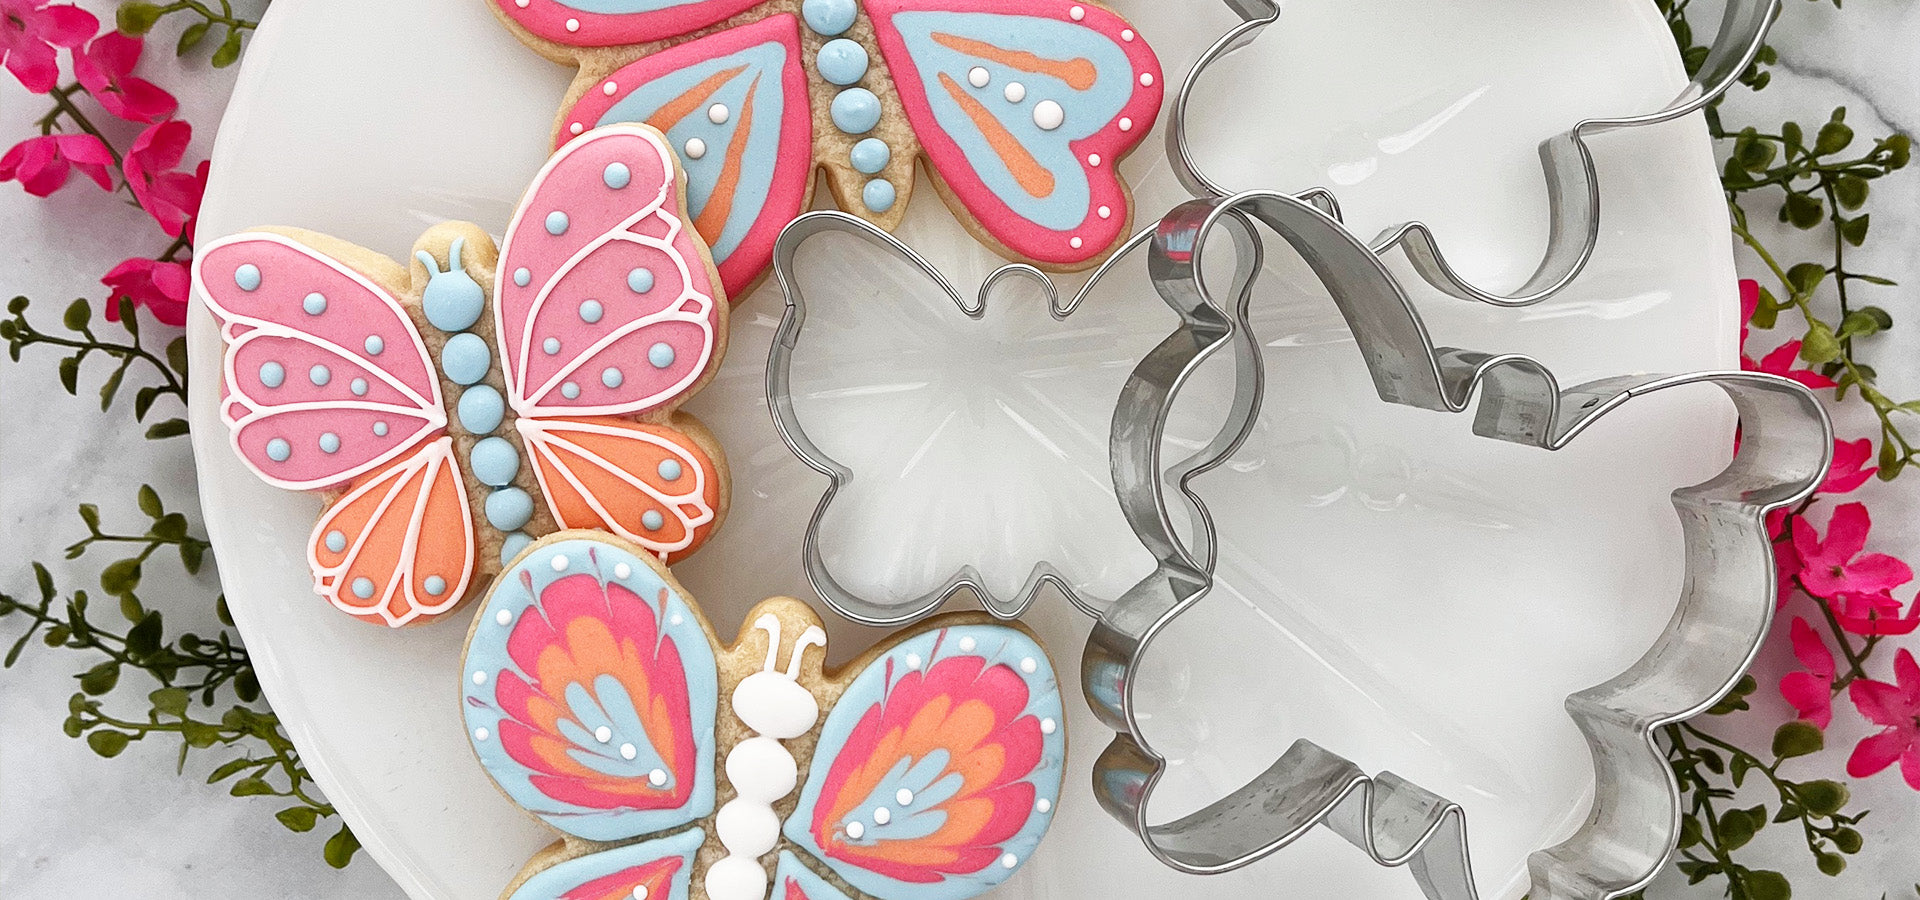 Butterfly cookies and cookie cutters on a white plate